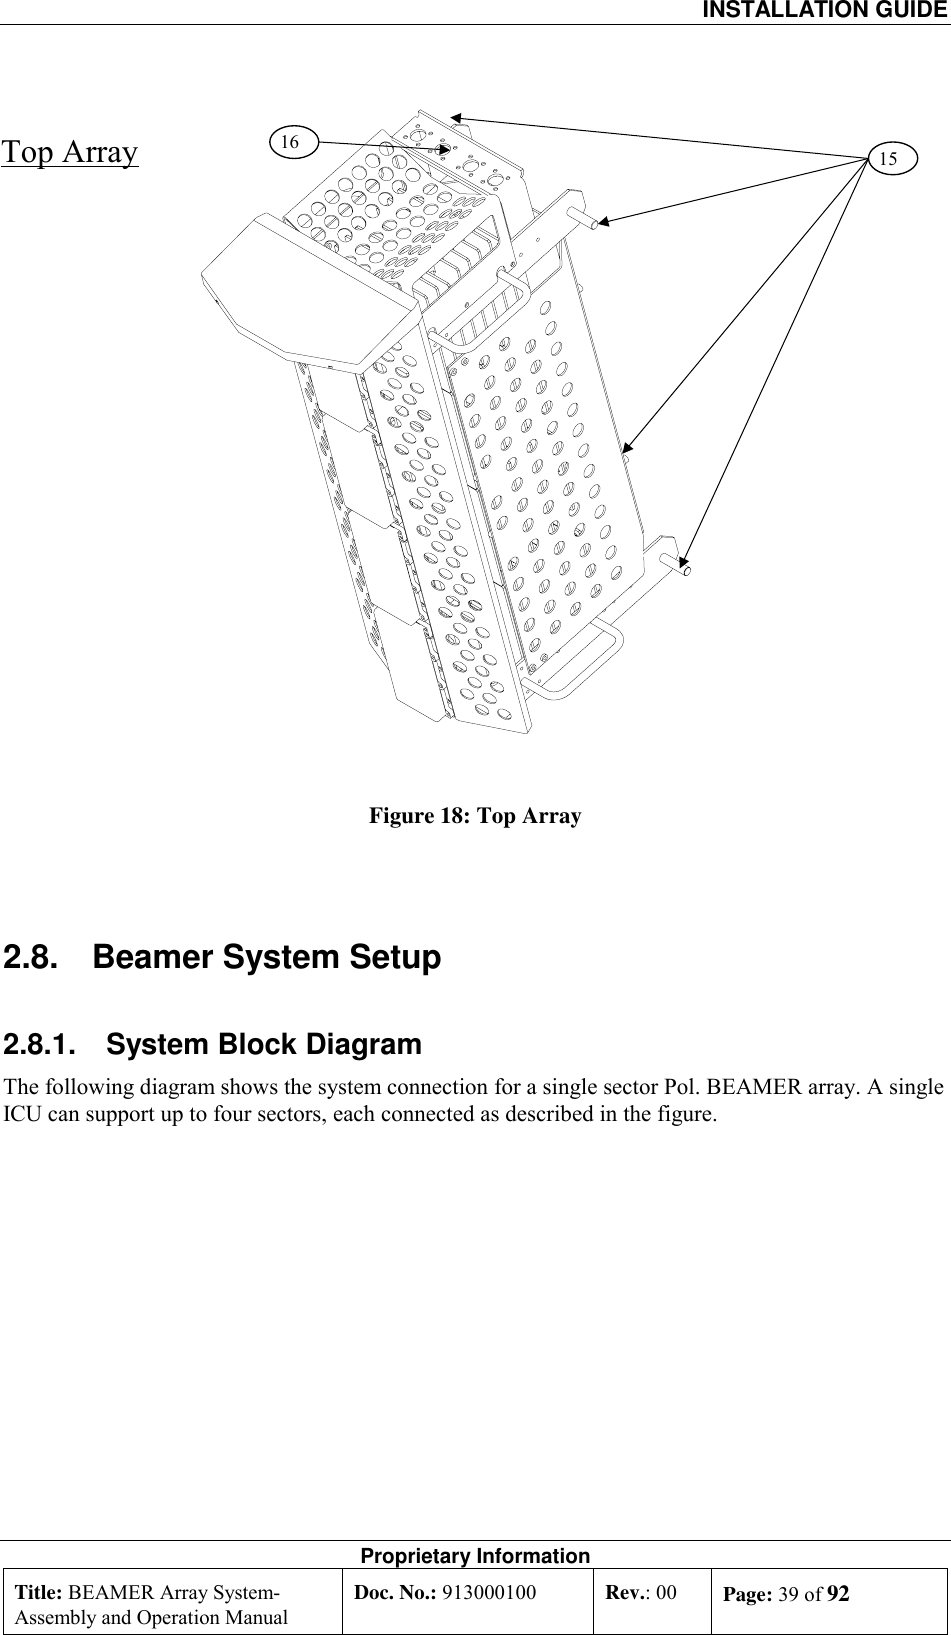  INSTALLATION GUIDE Proprietary Information Title: BEAMER Array System- Assembly and Operation Manual Doc. No.: 913000100  Rev.: 00  Page: 39 of 92   Figure 18: Top Array  2.8.  Beamer System Setup 2.8.1.  System Block Diagram The following diagram shows the system connection for a single sector Pol. BEAMER array. A single ICU can support up to four sectors, each connected as described in the figure. Top Array 1516